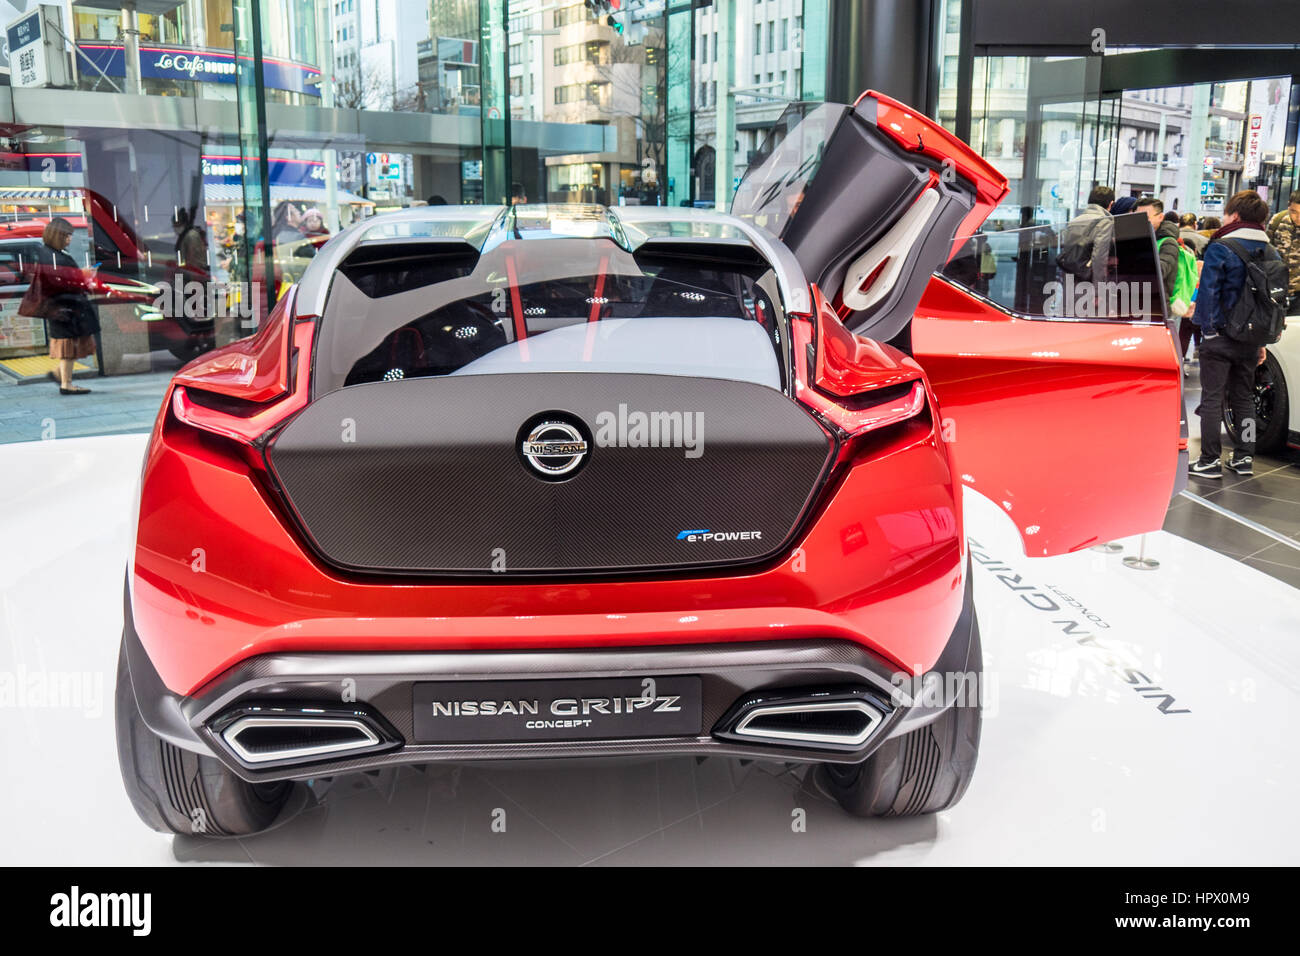 The Nissan Gripz Concept car on display in the marquee showroom, Nissan Gallery in Ginza, Tokyo. Stock Photo